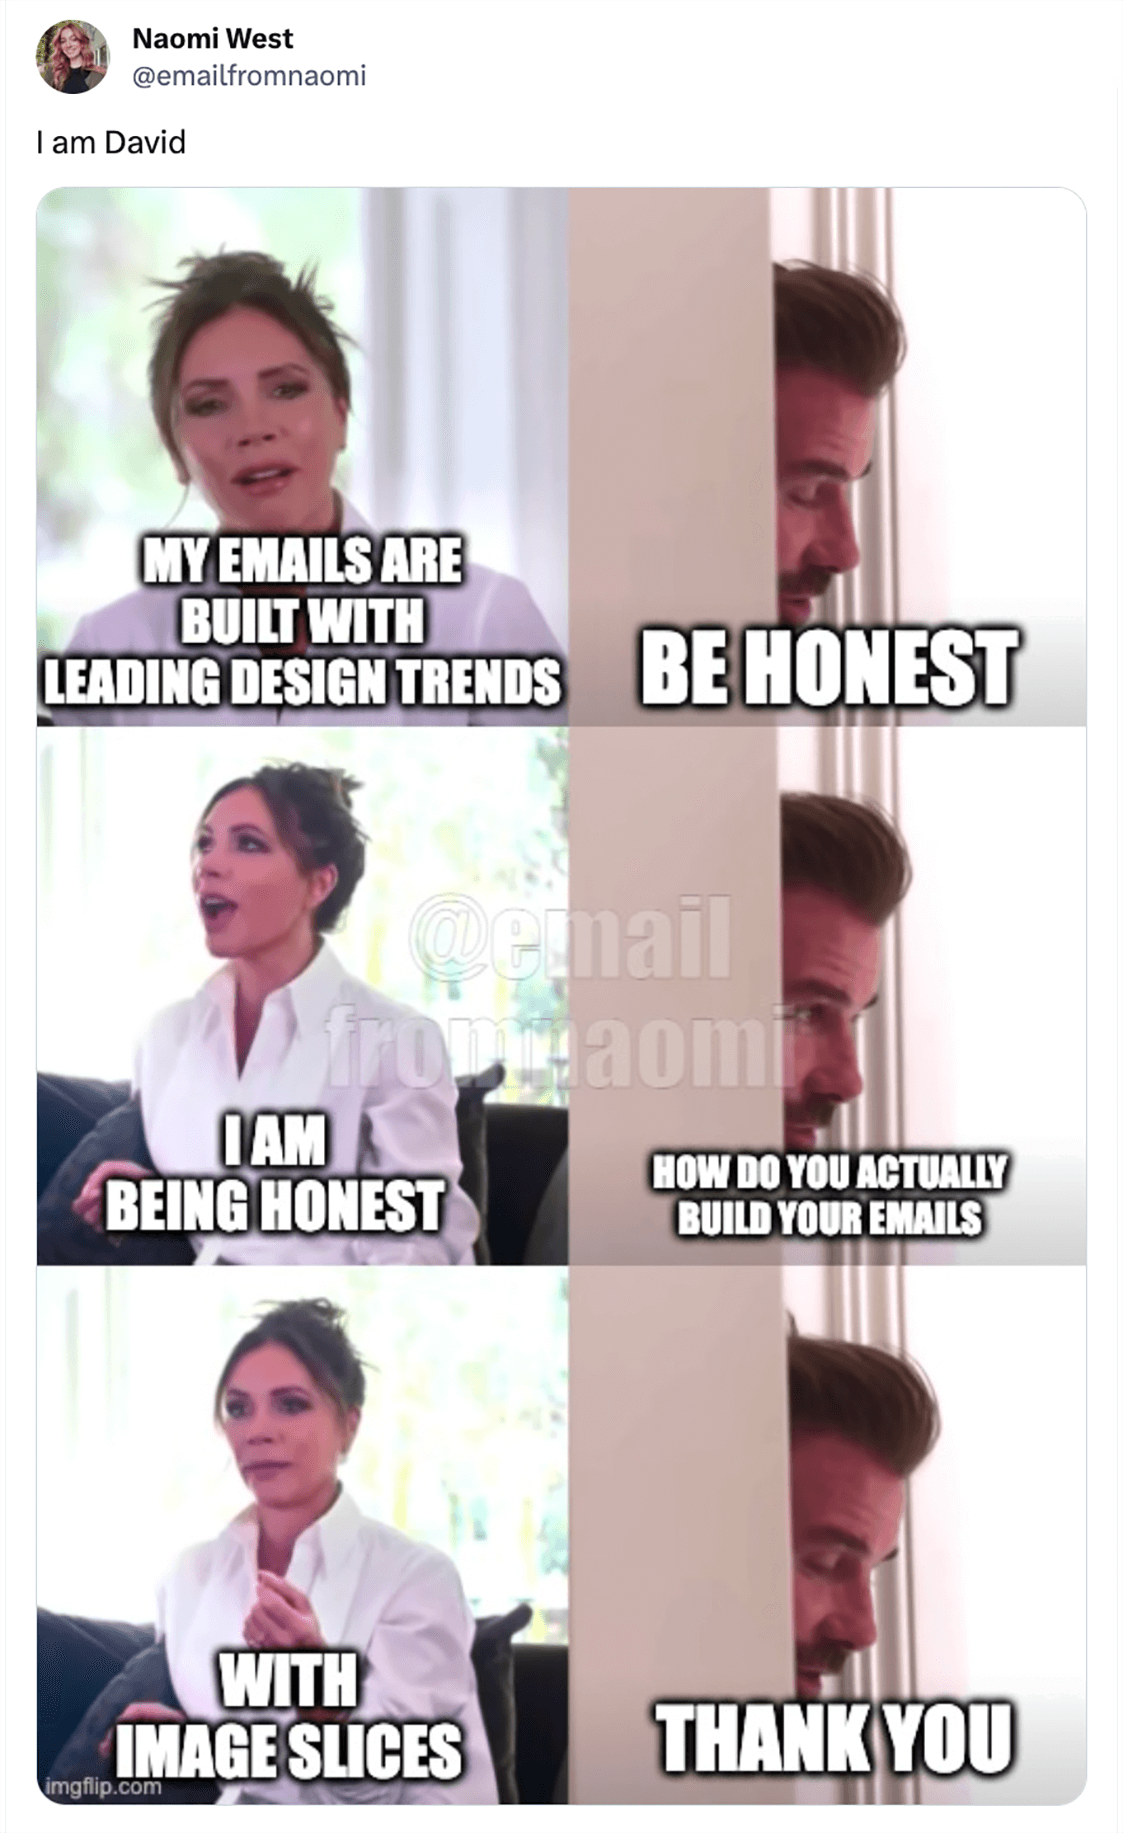 Naomi West @emailfromnaomi on X says: 'I am David' with a meme of a conversation between two people that says, 'My emails are built with leading design trends' 'be honest' 'I am being honest' 'how do you actually build your emails' 'with image slices' 'thank you'